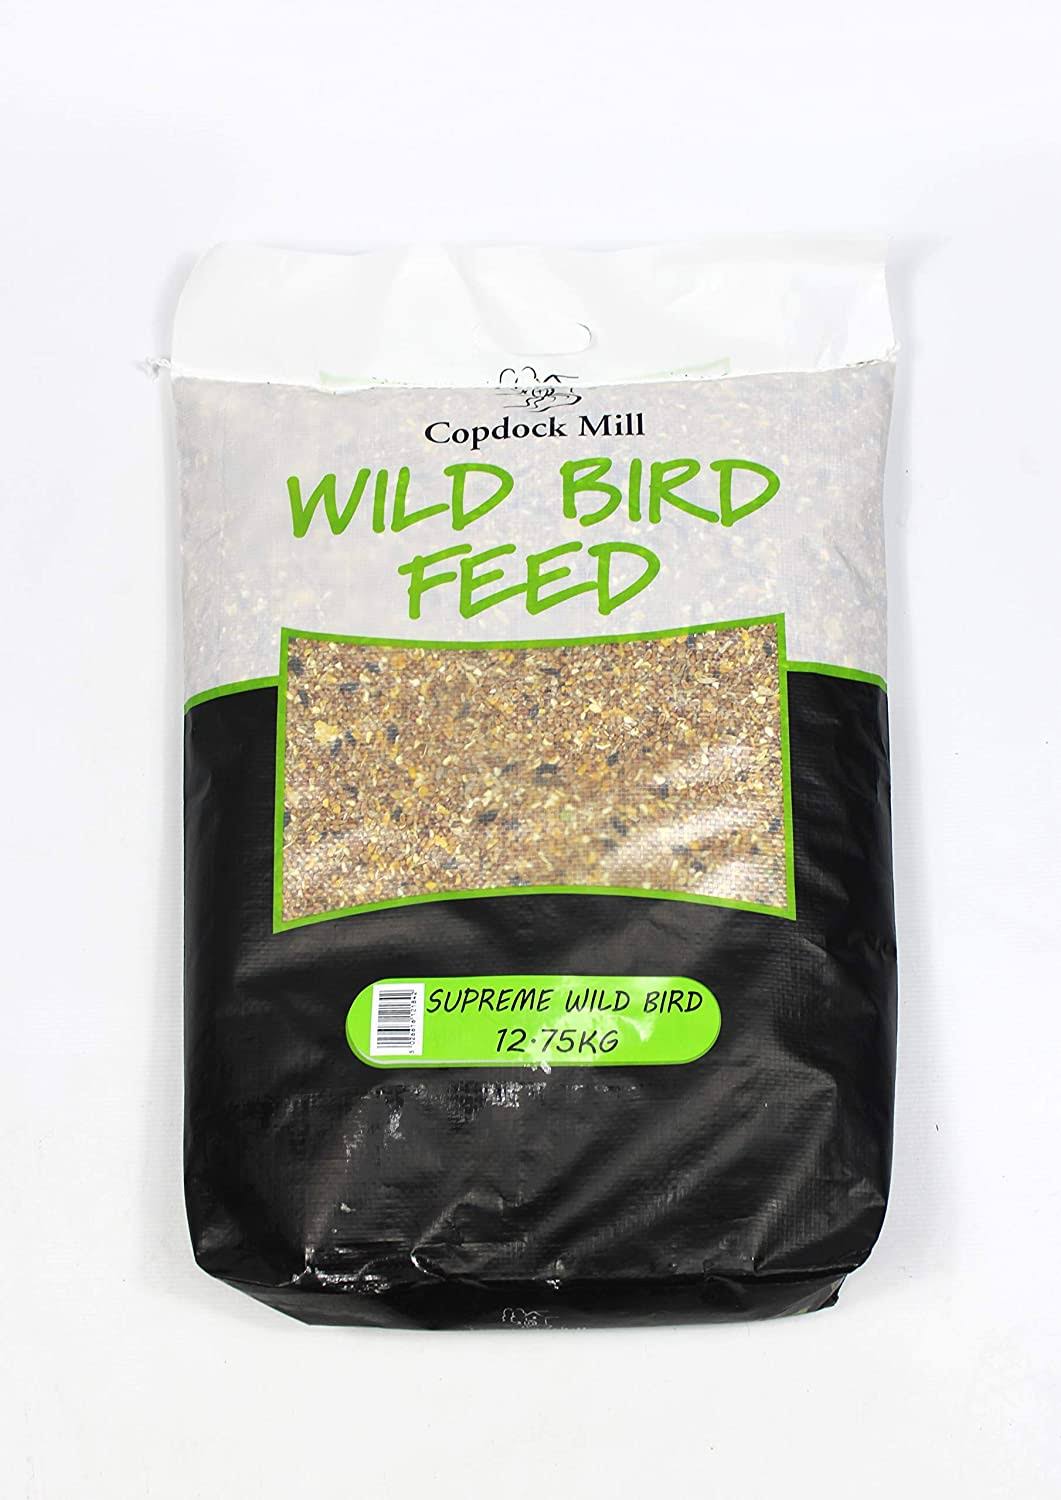 Copdock Mill Supreme Wild Bird Food Mix, 12.75kg, All Seasons, Ideal for Hanging Feeders, Bird Tables & Ground Feeders